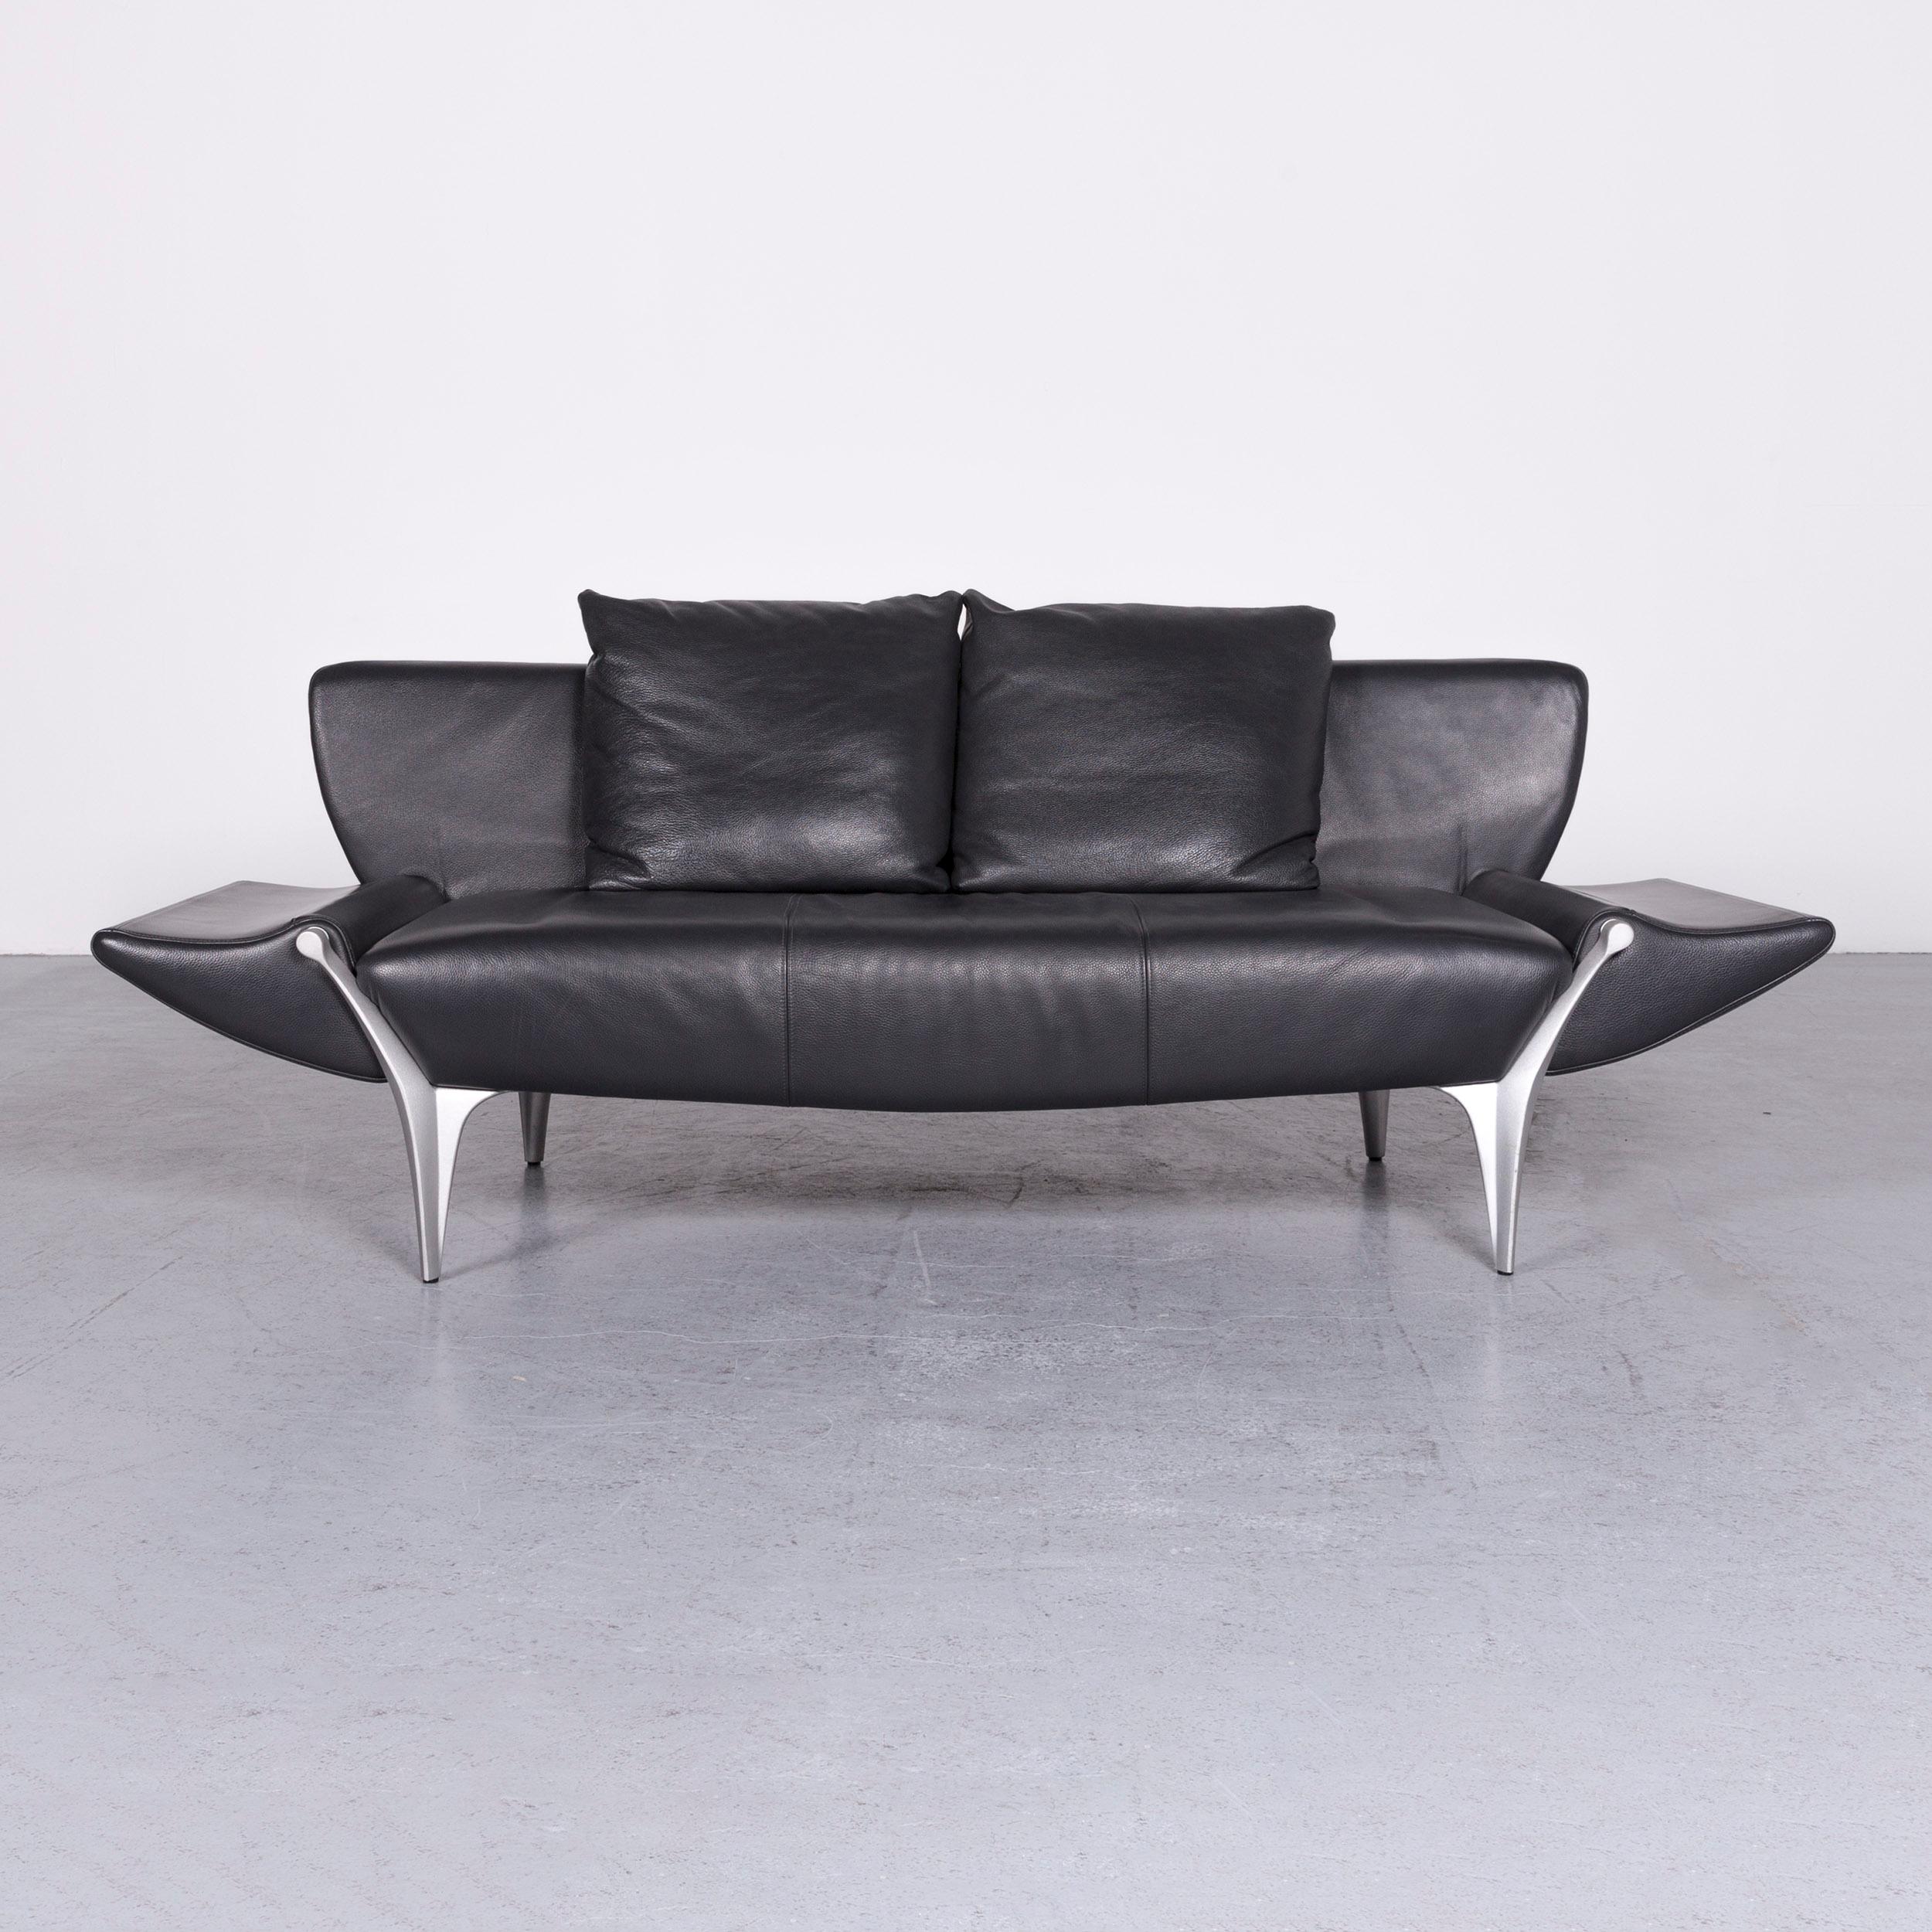 German Rolf Benz 1600 Designer Leather Sofa Black Two-Seat Couch